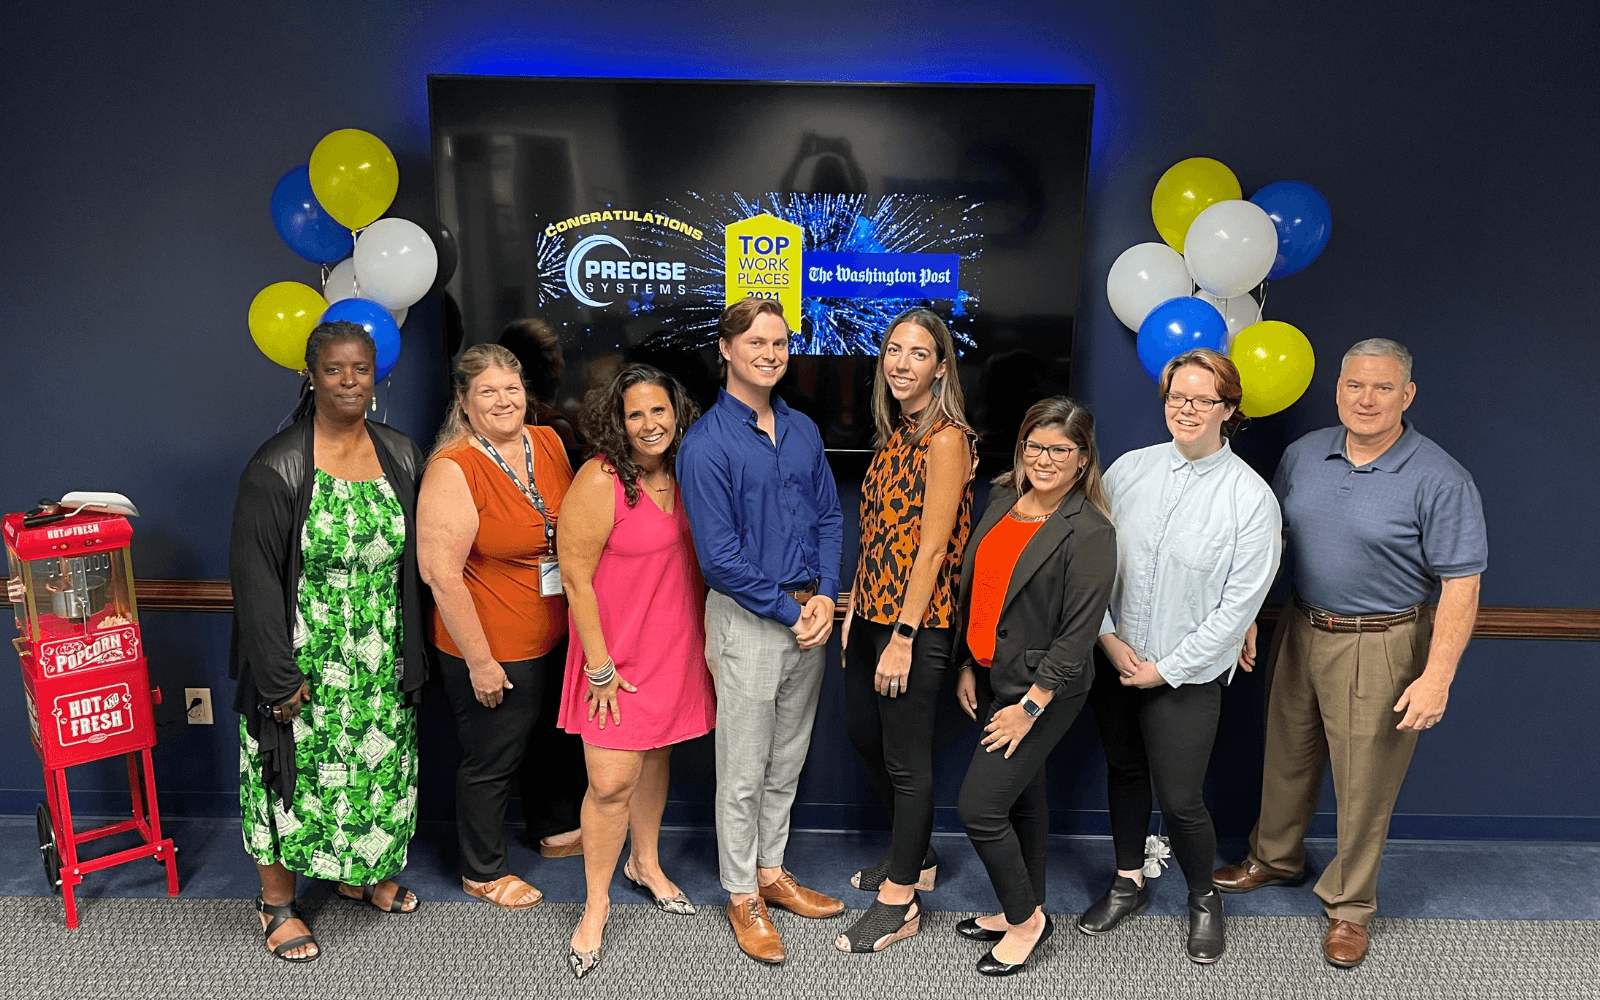 Precise celebrating Top Workplaces 2021